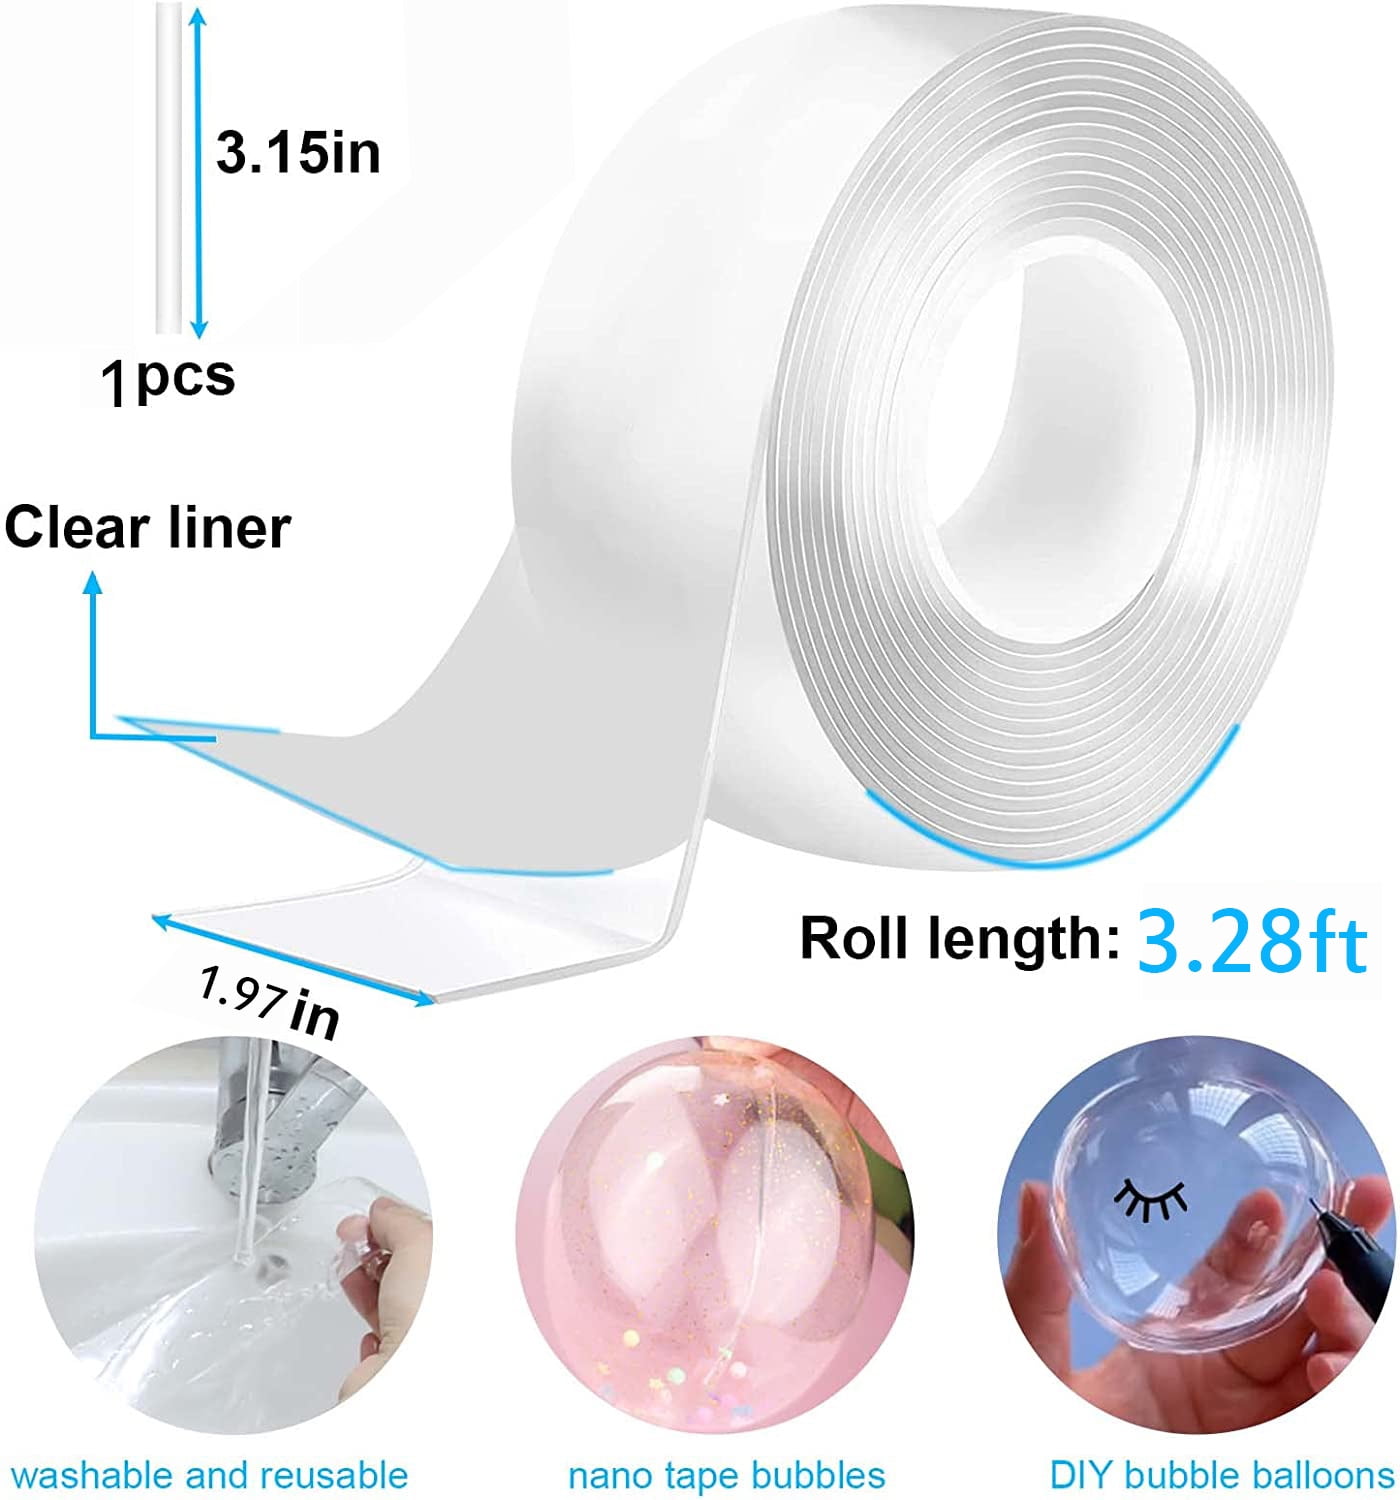 Rumbeast 6 Pcs Double Sided Tape Roller, 197Inch x 3mm Roller Transparent Adhesive Glue Tape for Scrapbooking, Crafting, Cards, Photo, Gift Wrapping